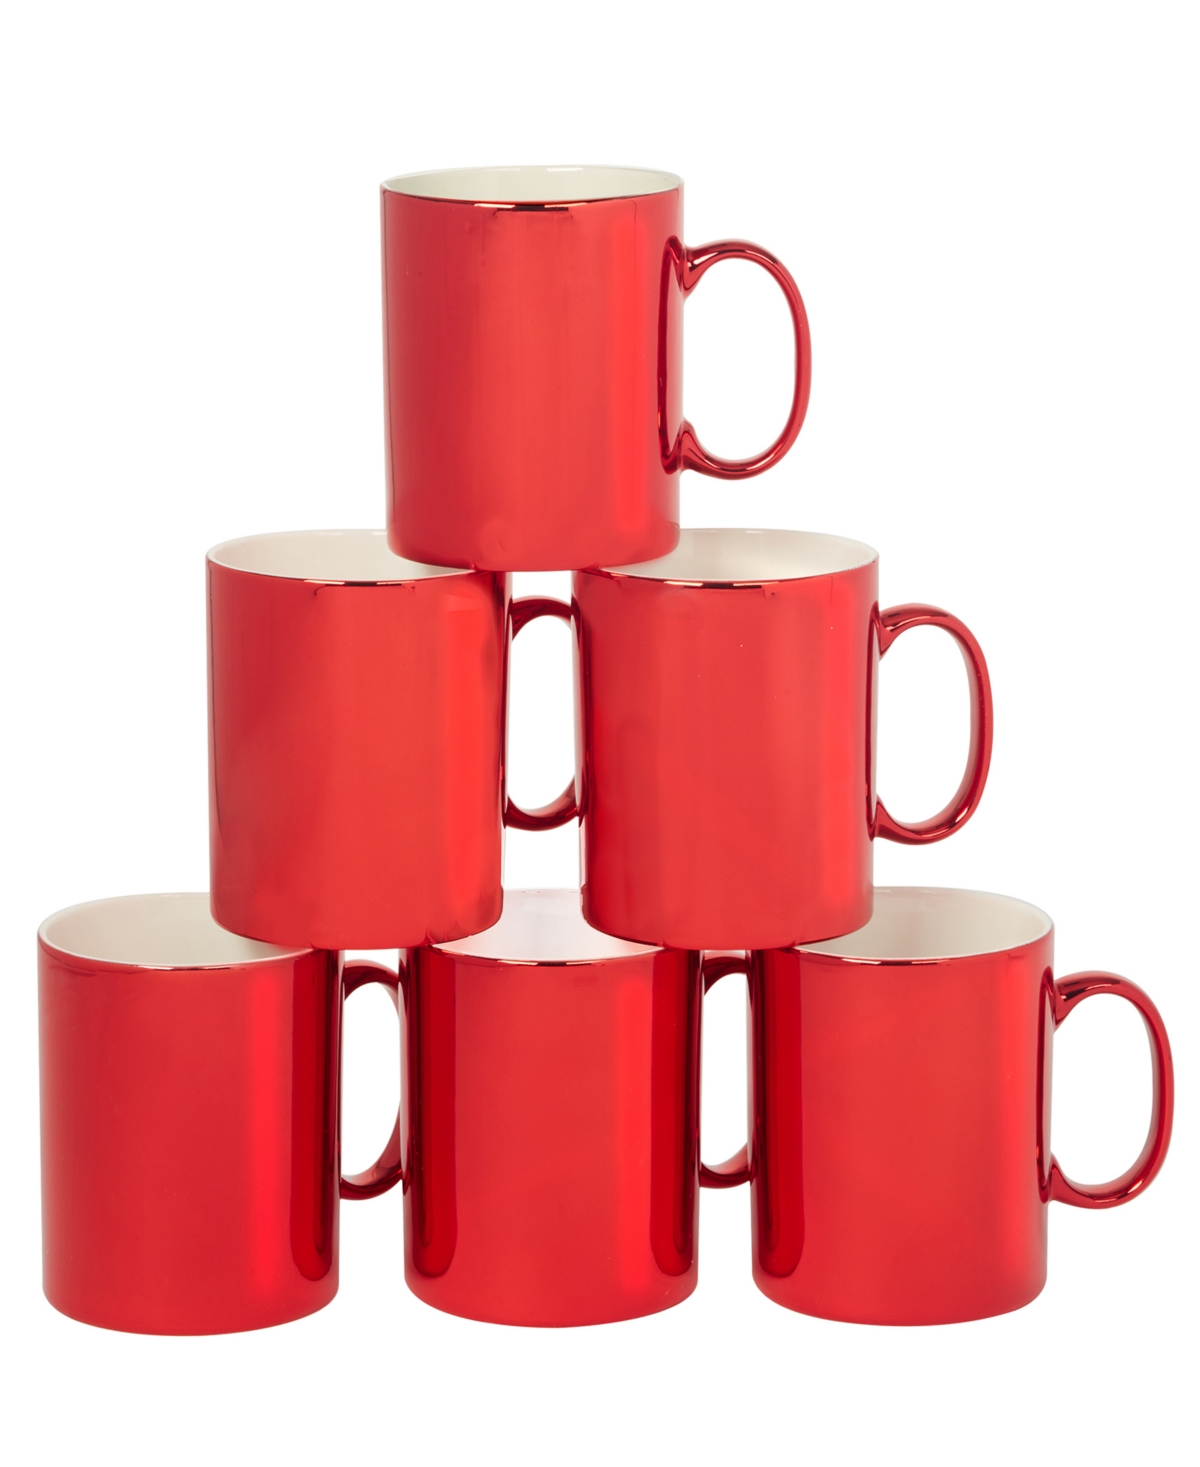 Certified International Holiday Lights 16 oz Mugs Set Of 6, Service For 6 In Red